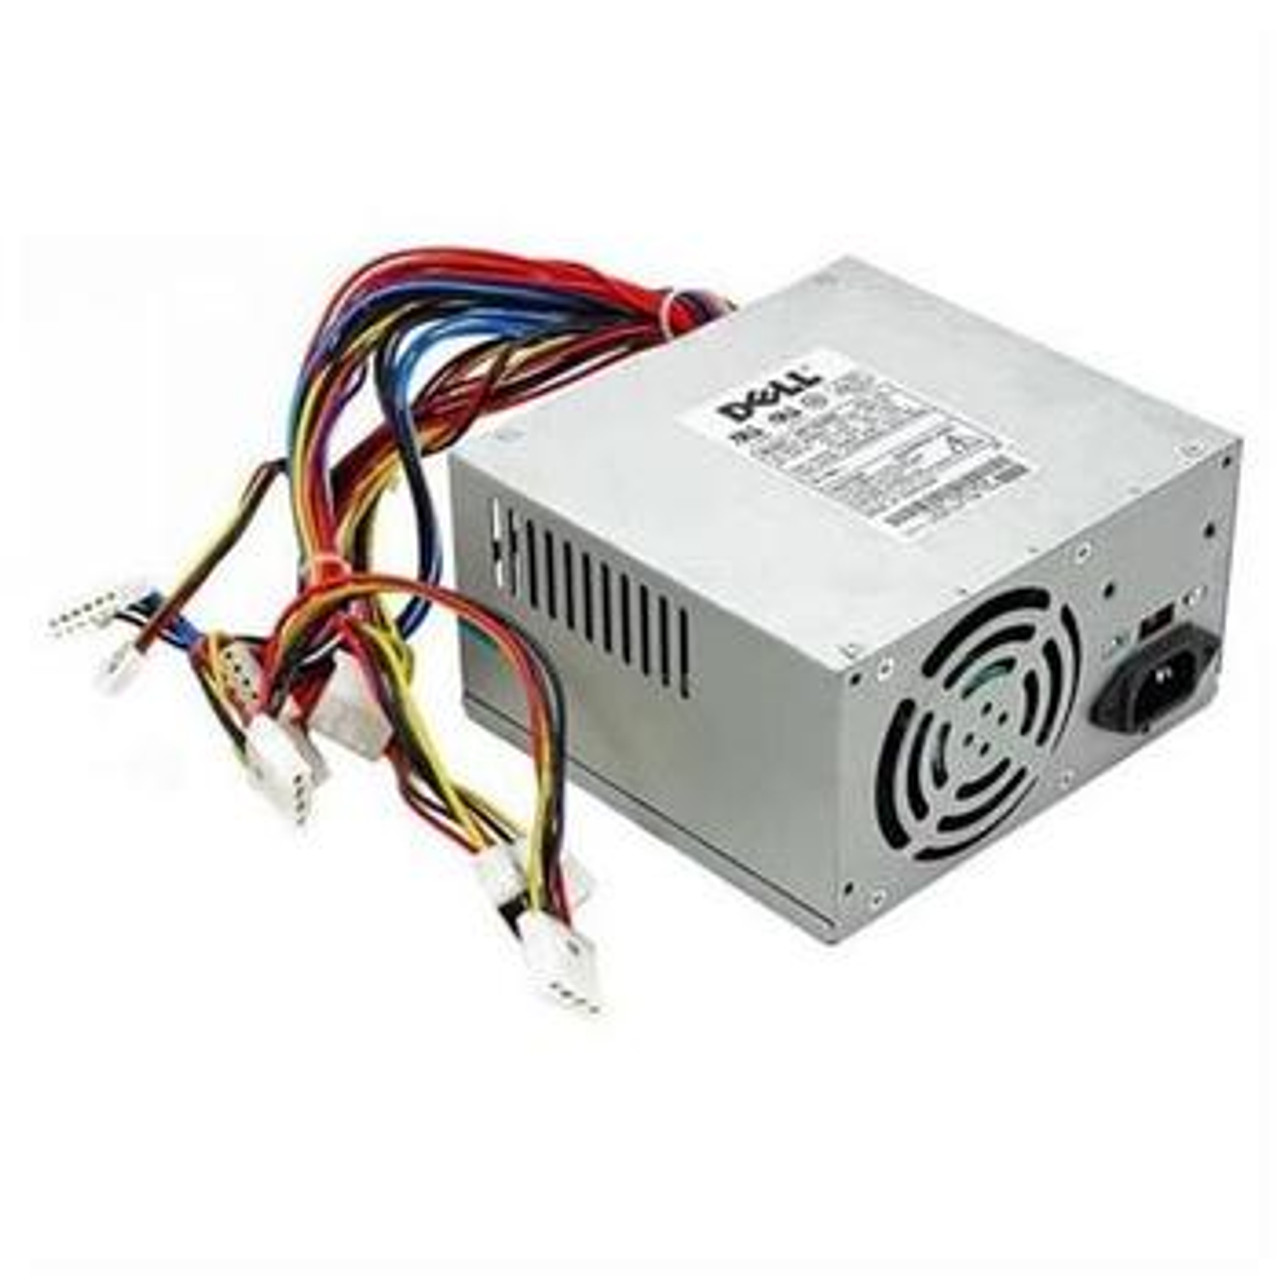 09X810 Dell 1200-Watts Hot-Pluggable Power Supply